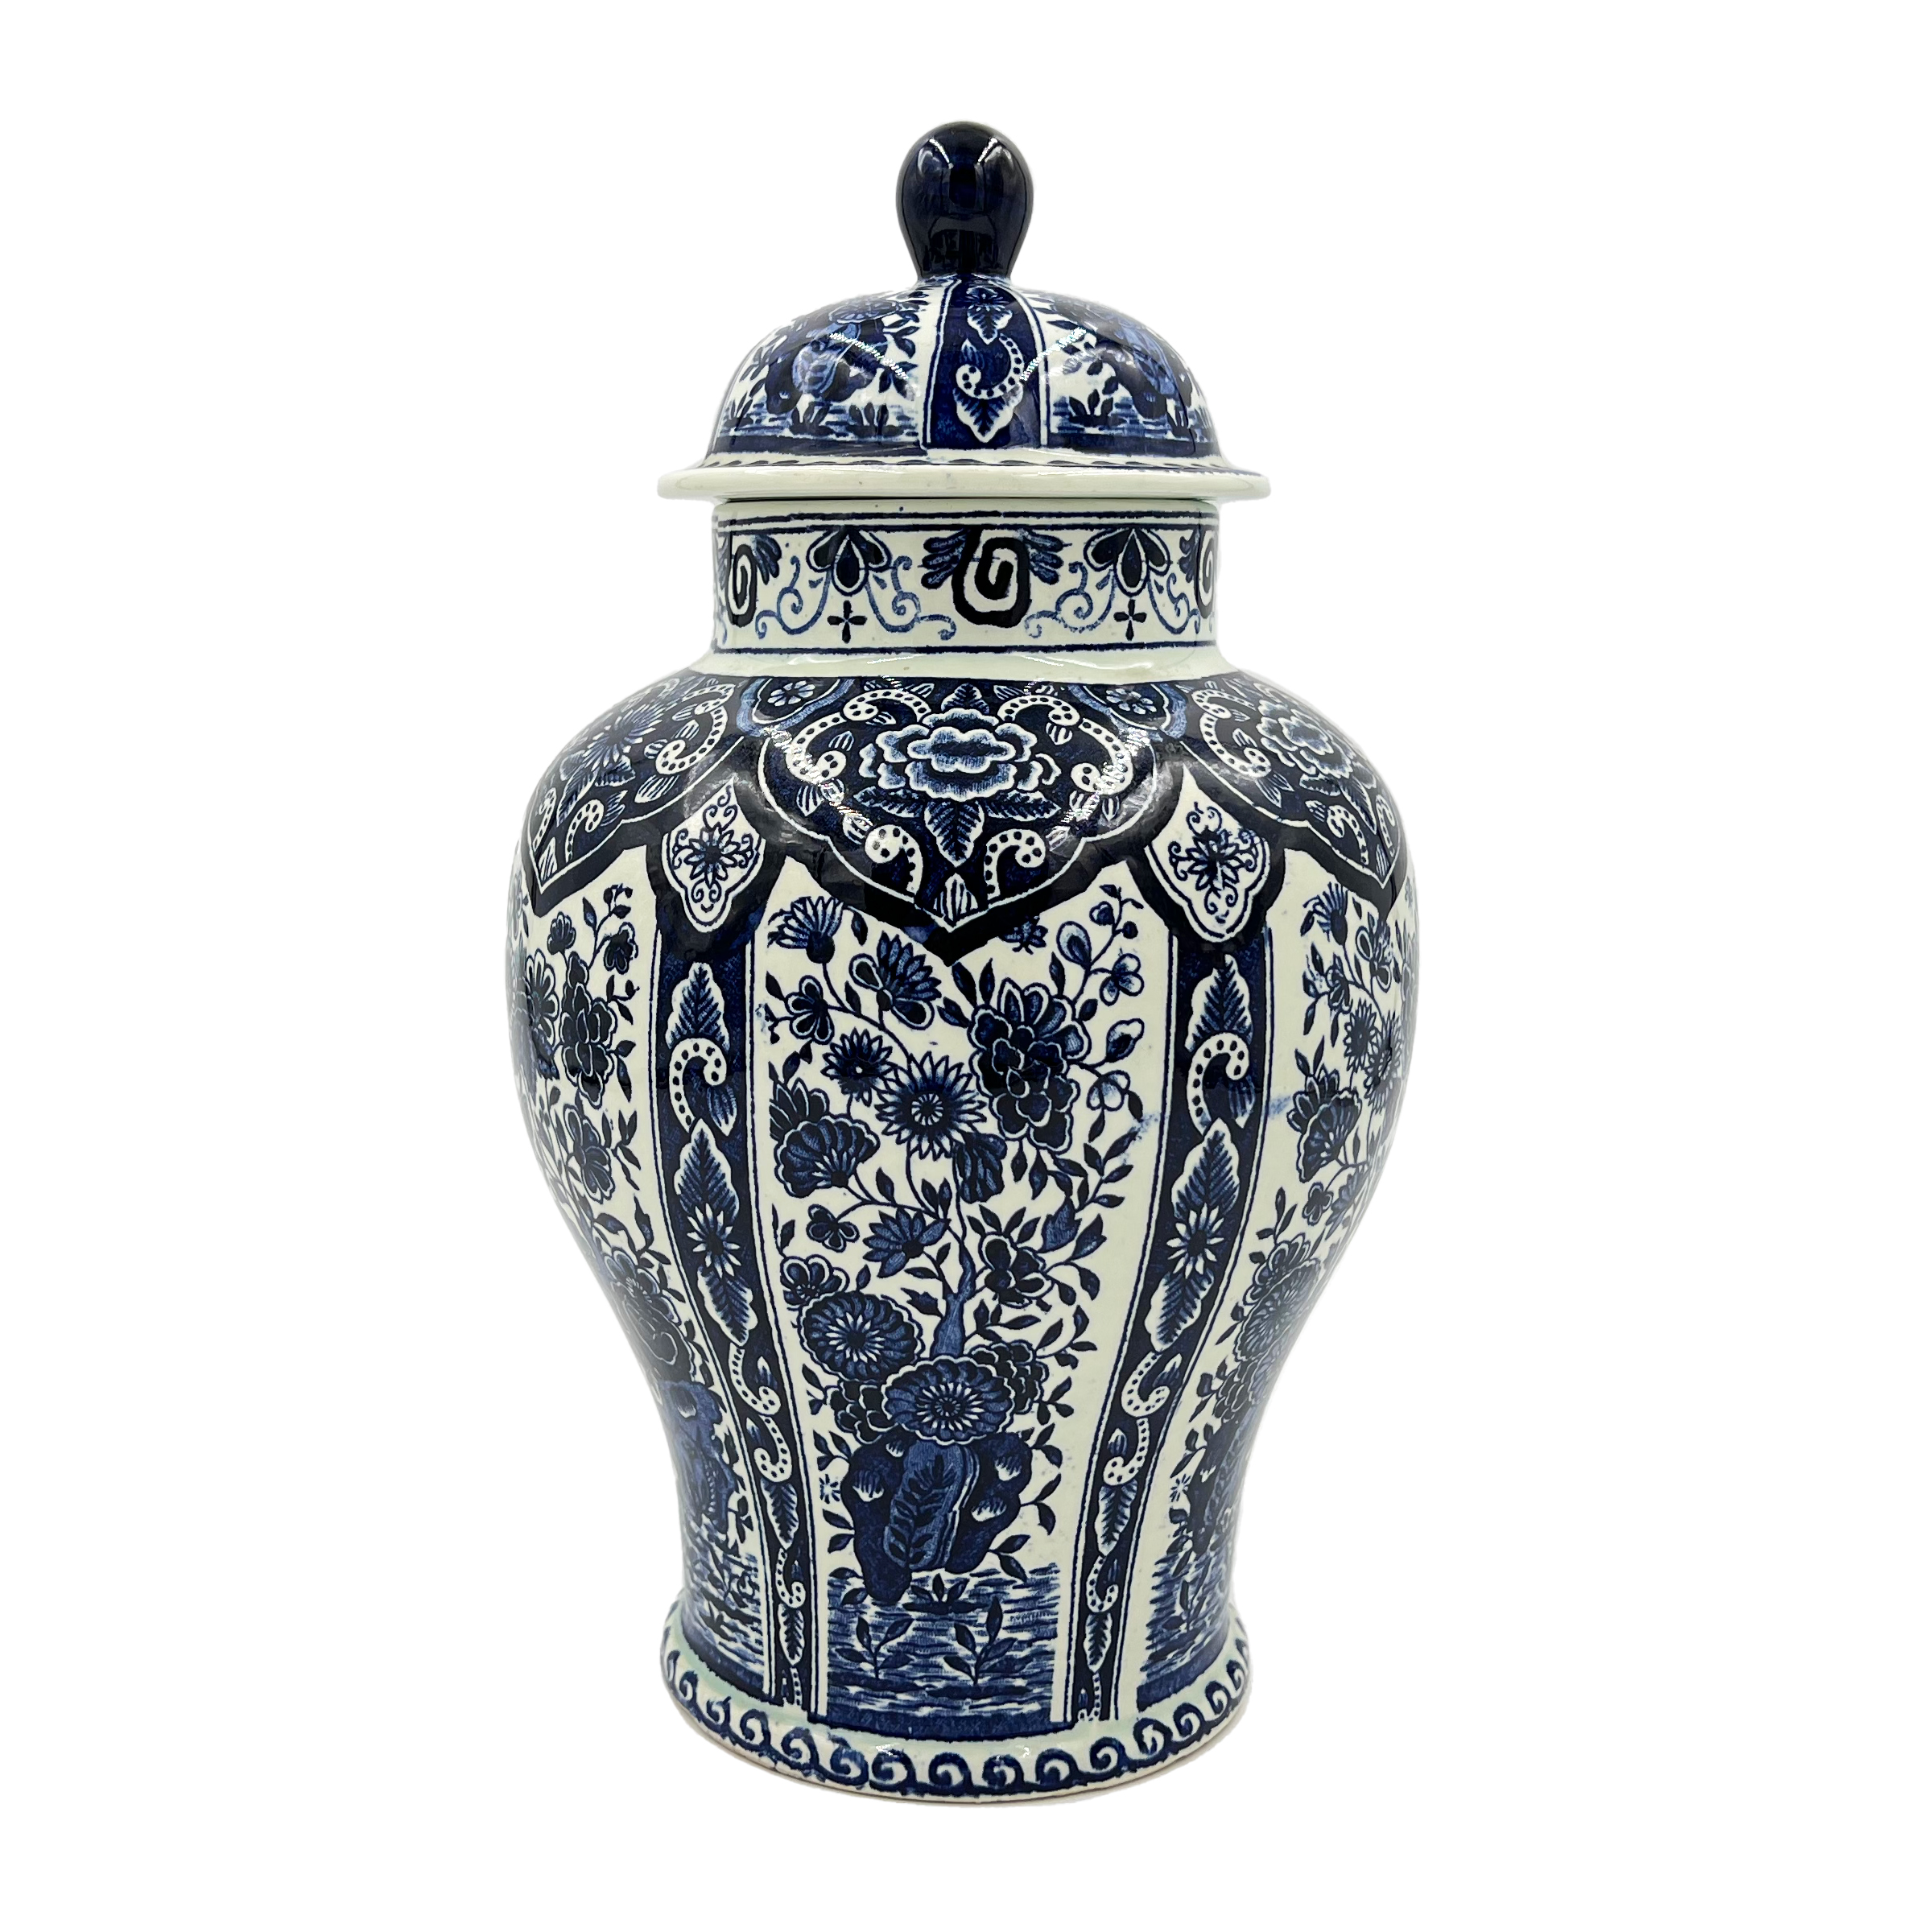 BLUE AND WHITE PORCELAIN VASE BY BOCH